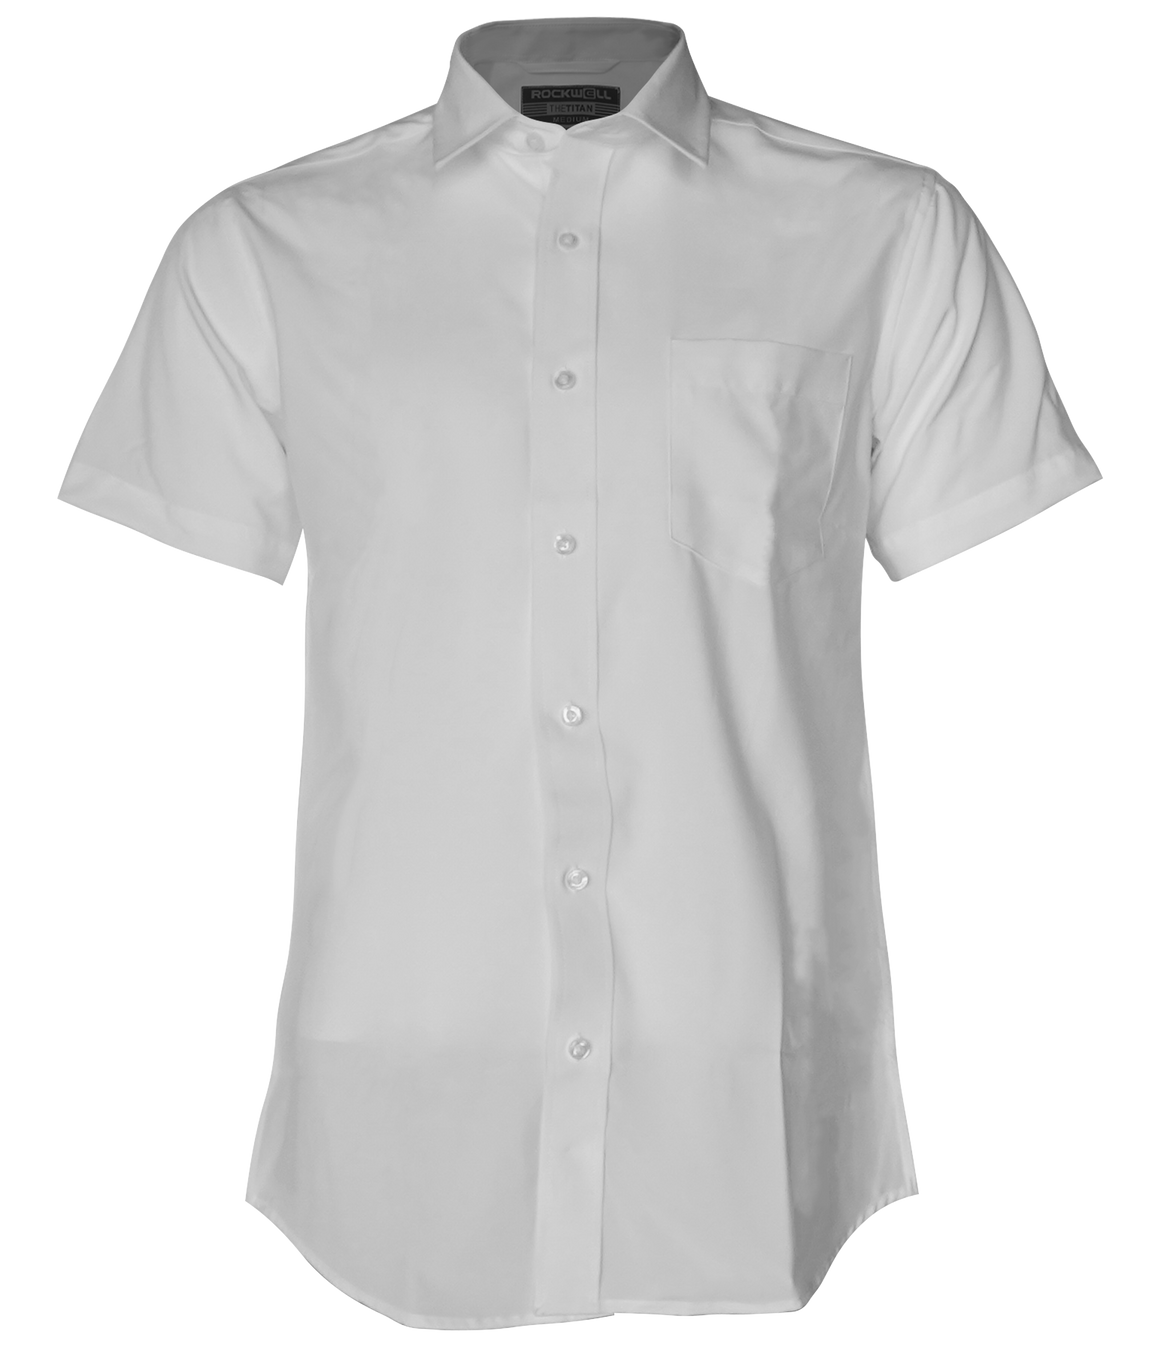 Rockwell Short Sleeve Button Down Shirt - recoveryparade-japan.com